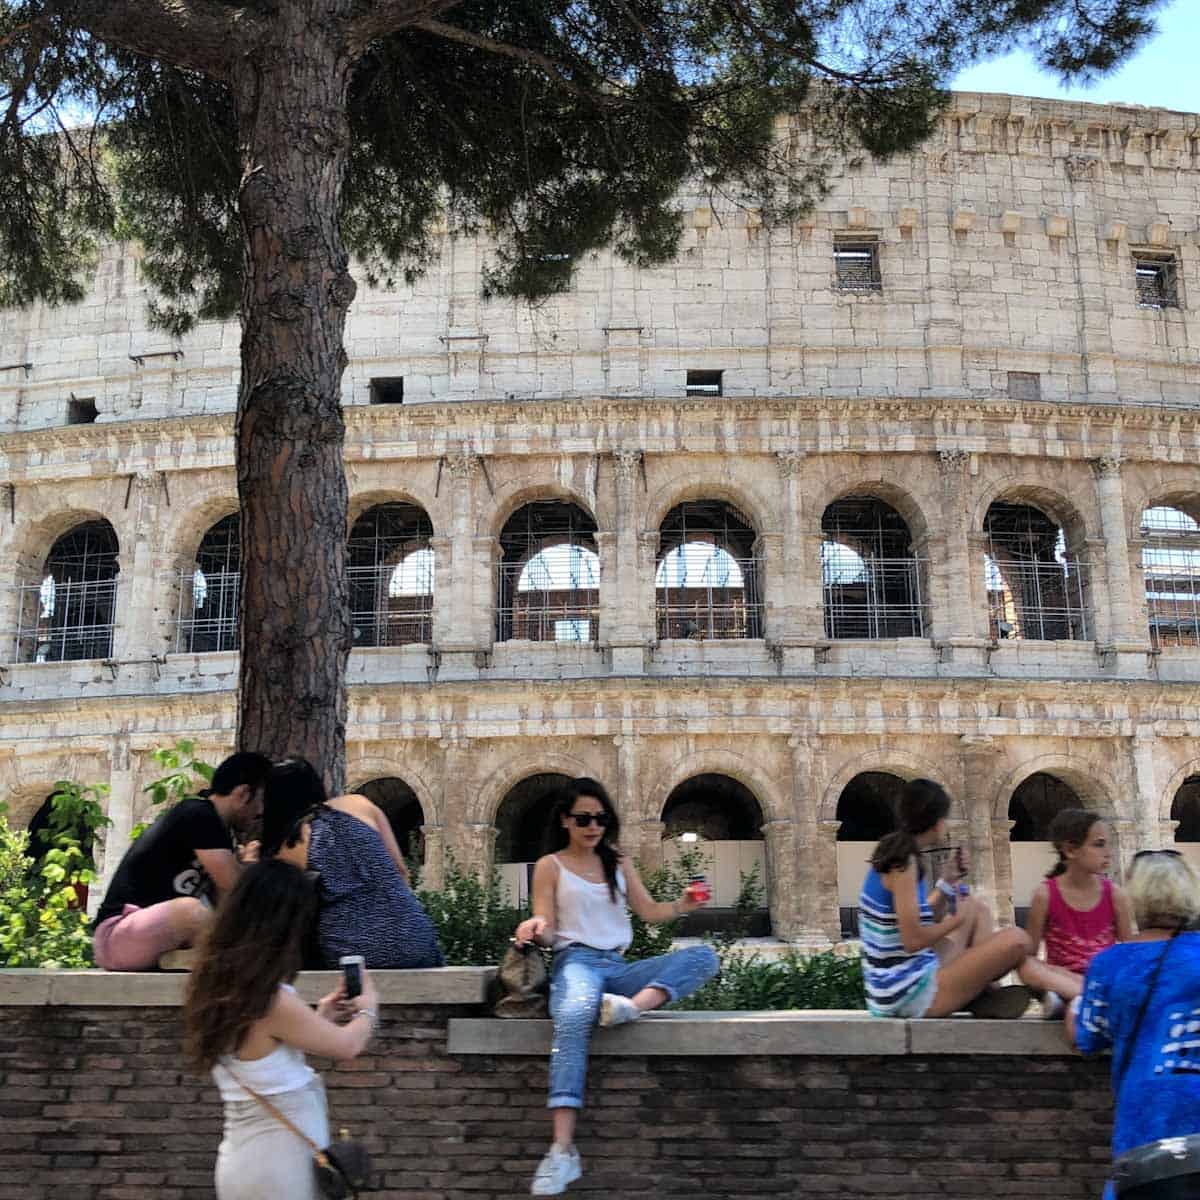 People sitting outside the the Roman Colosseum building.